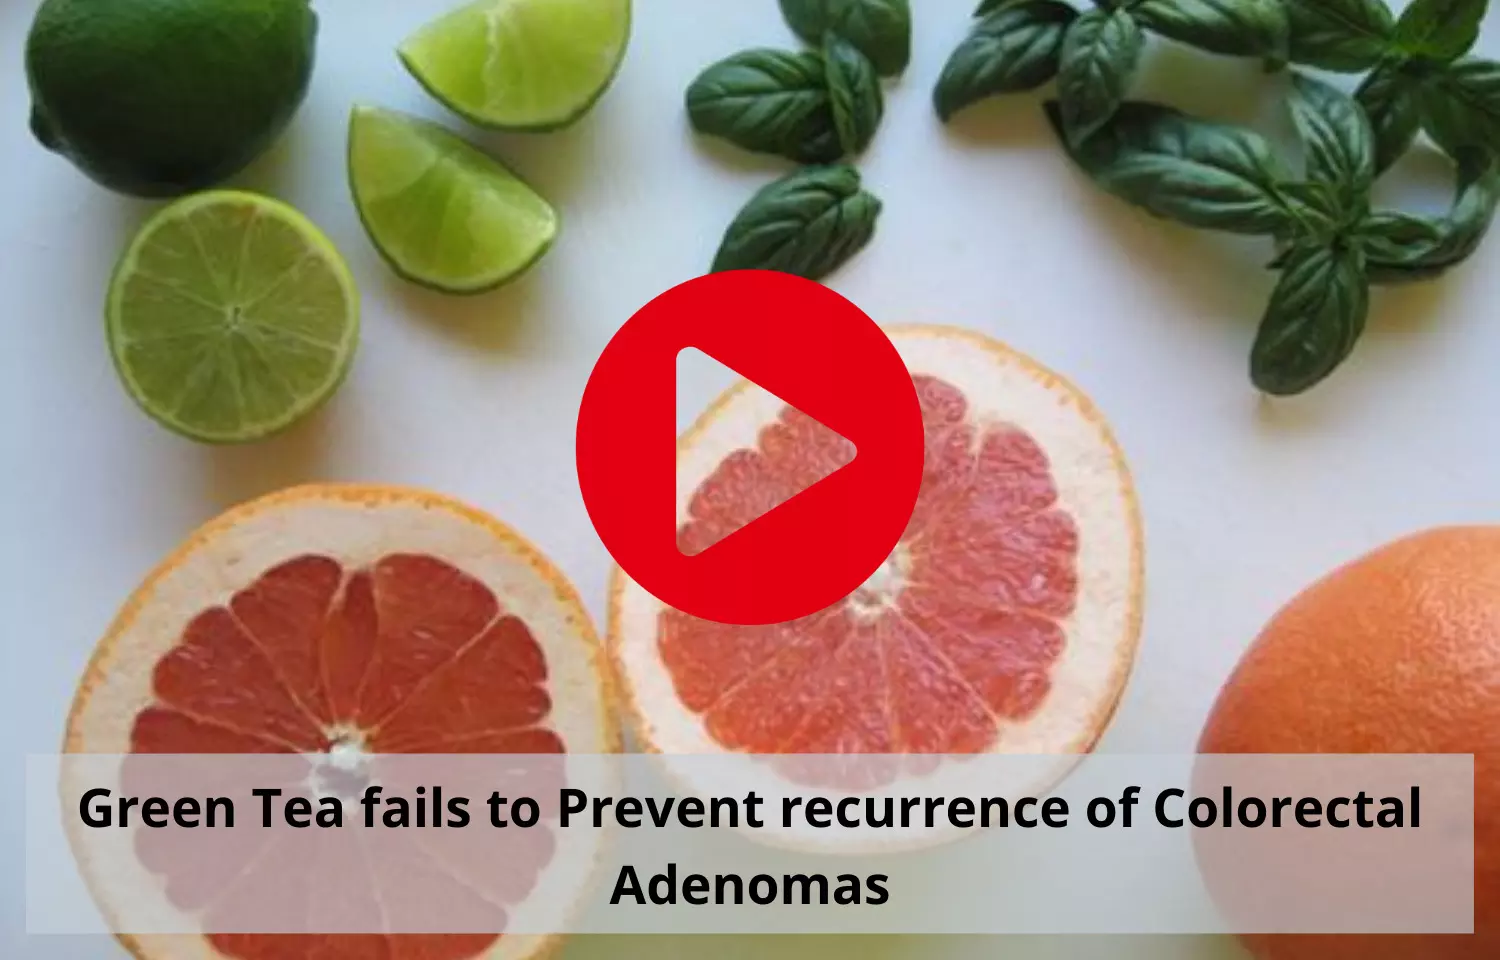 Green Tea cannot prevent recurrence of Colorectal Adenomas